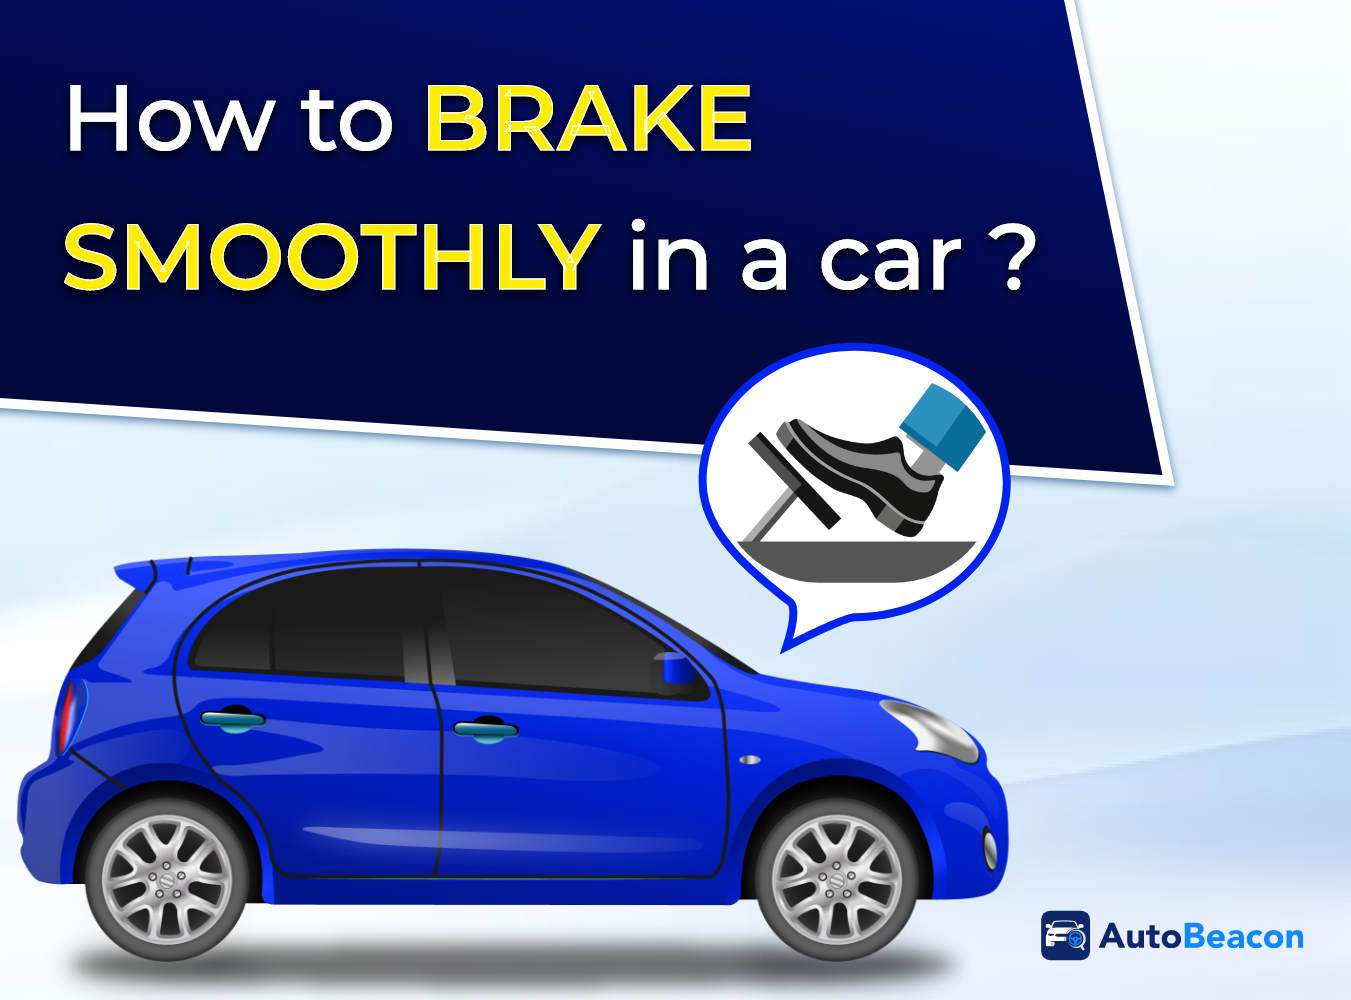 How to Brake Smooothly